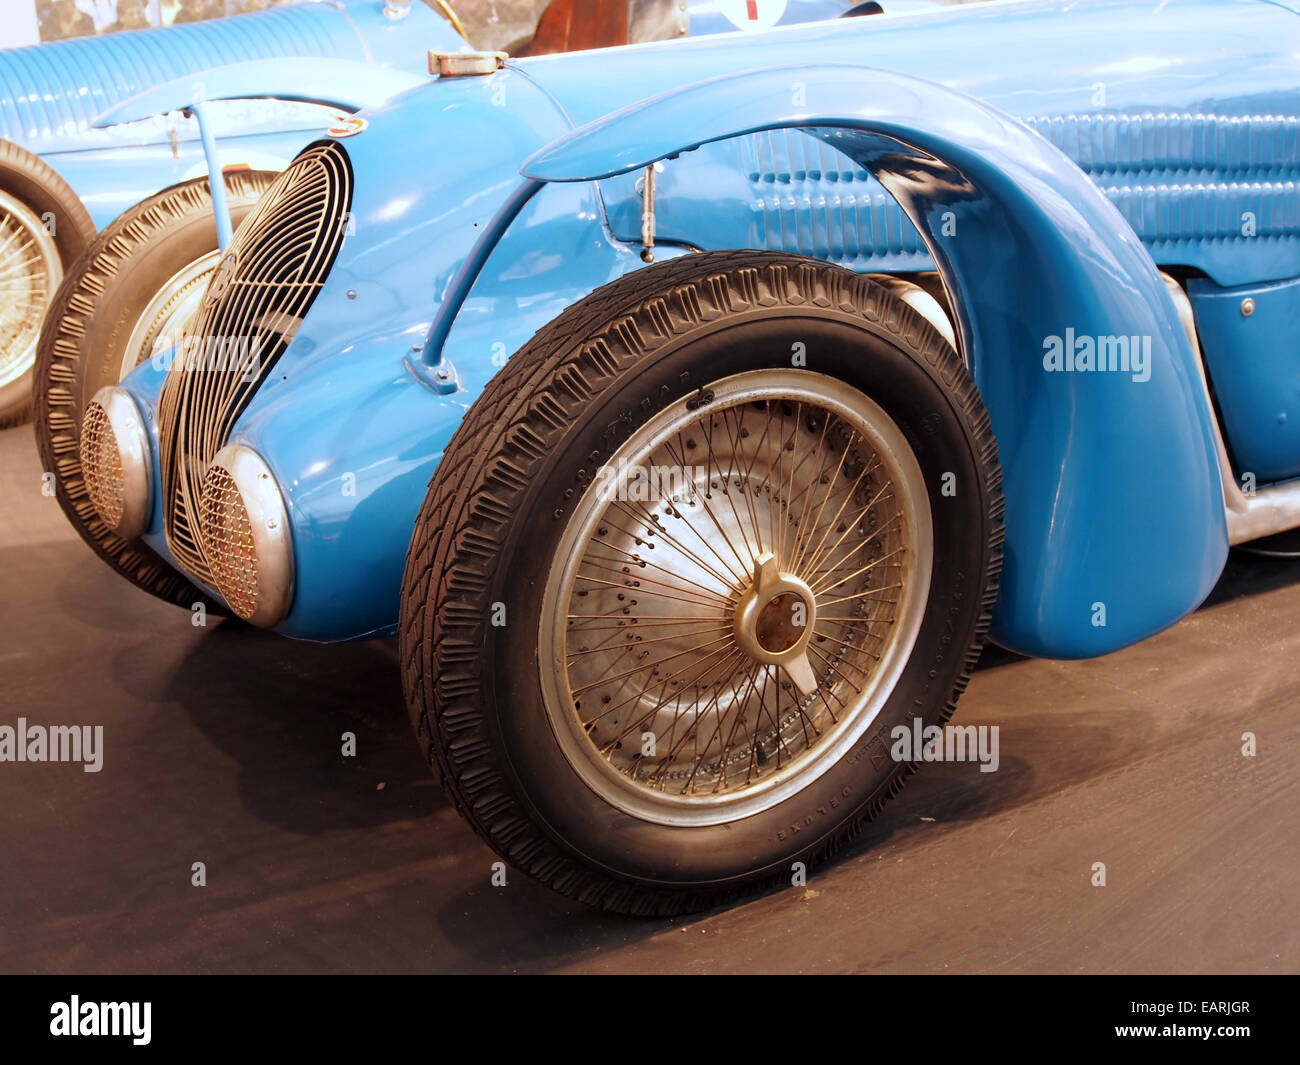 1938 Bugatti Type GP 59-50B, 8 cylindres, 4741cm3, 400hp, 300km/h, photo 1 Banque D'Images